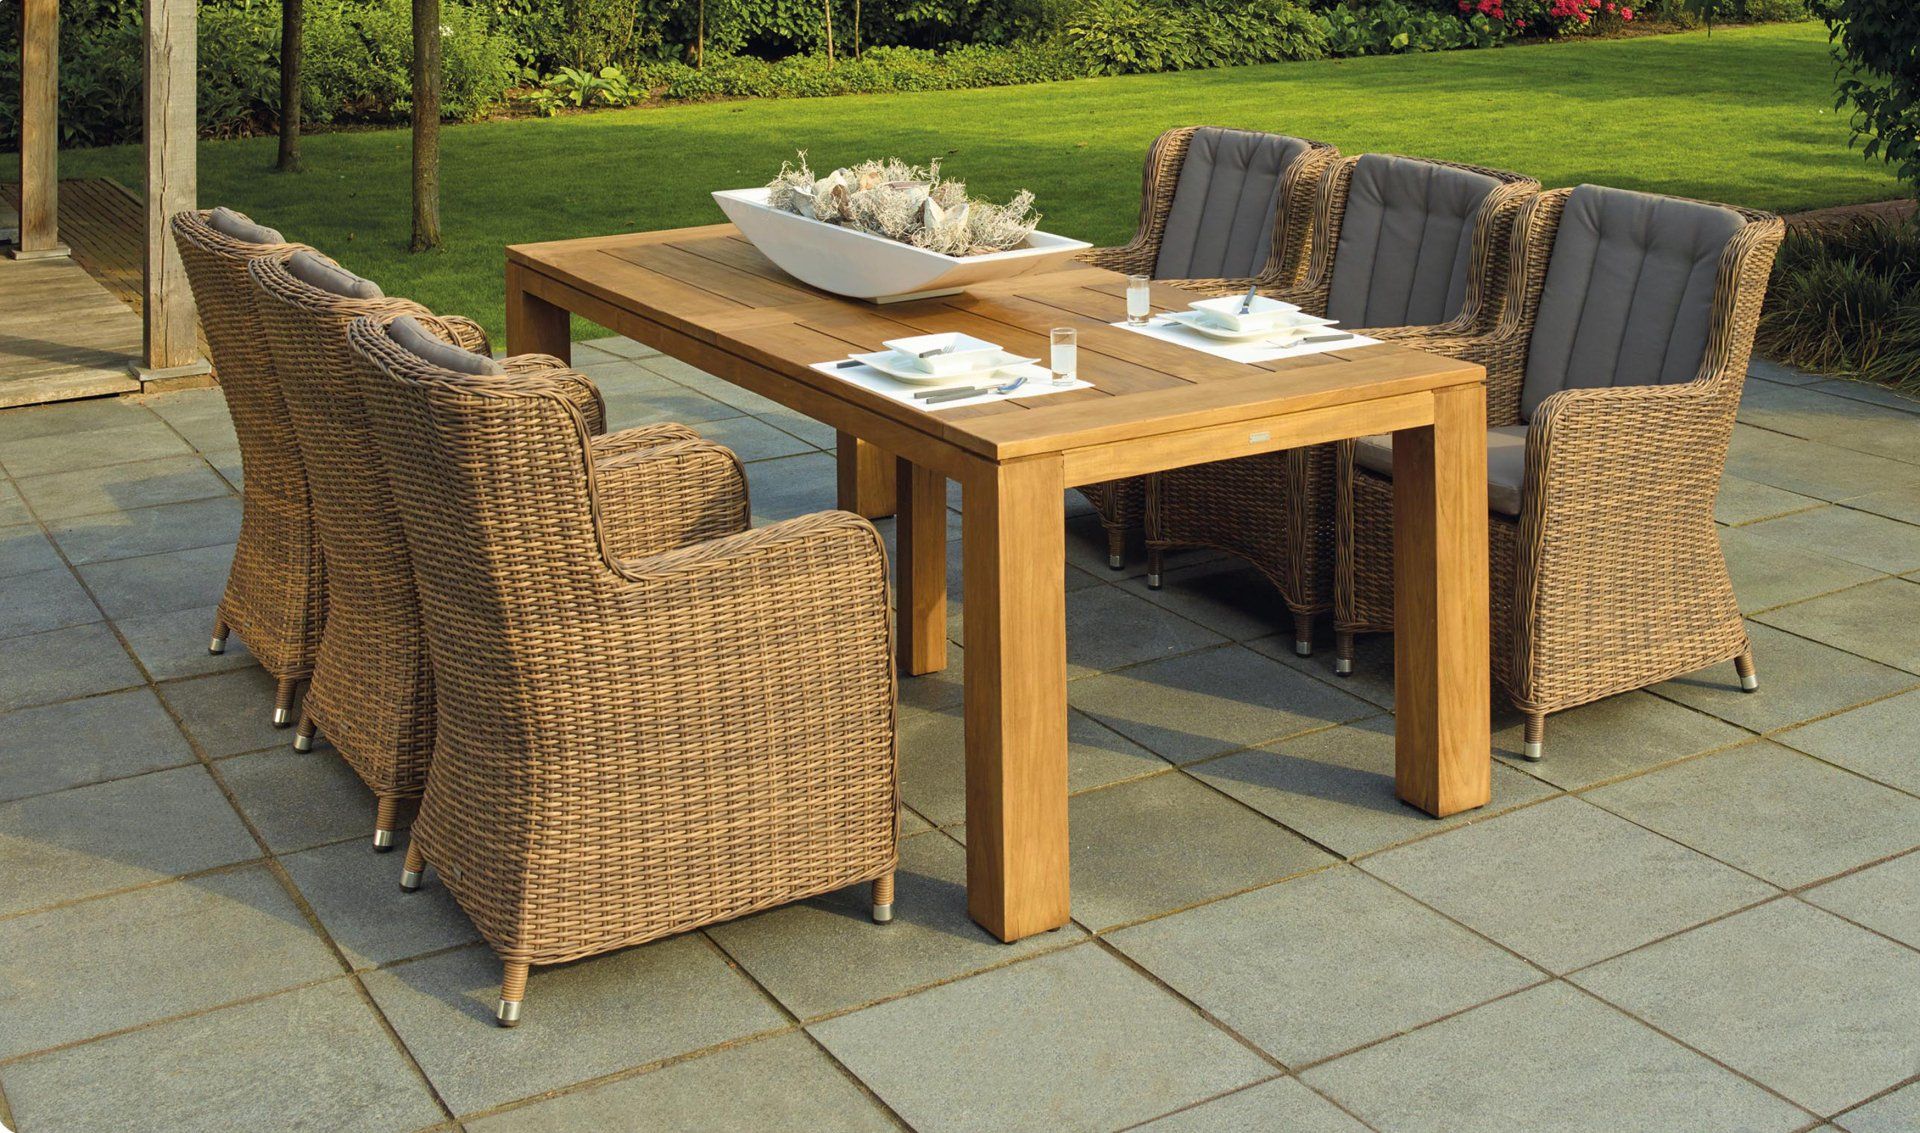 Paved Patio and outdoor table and chairs